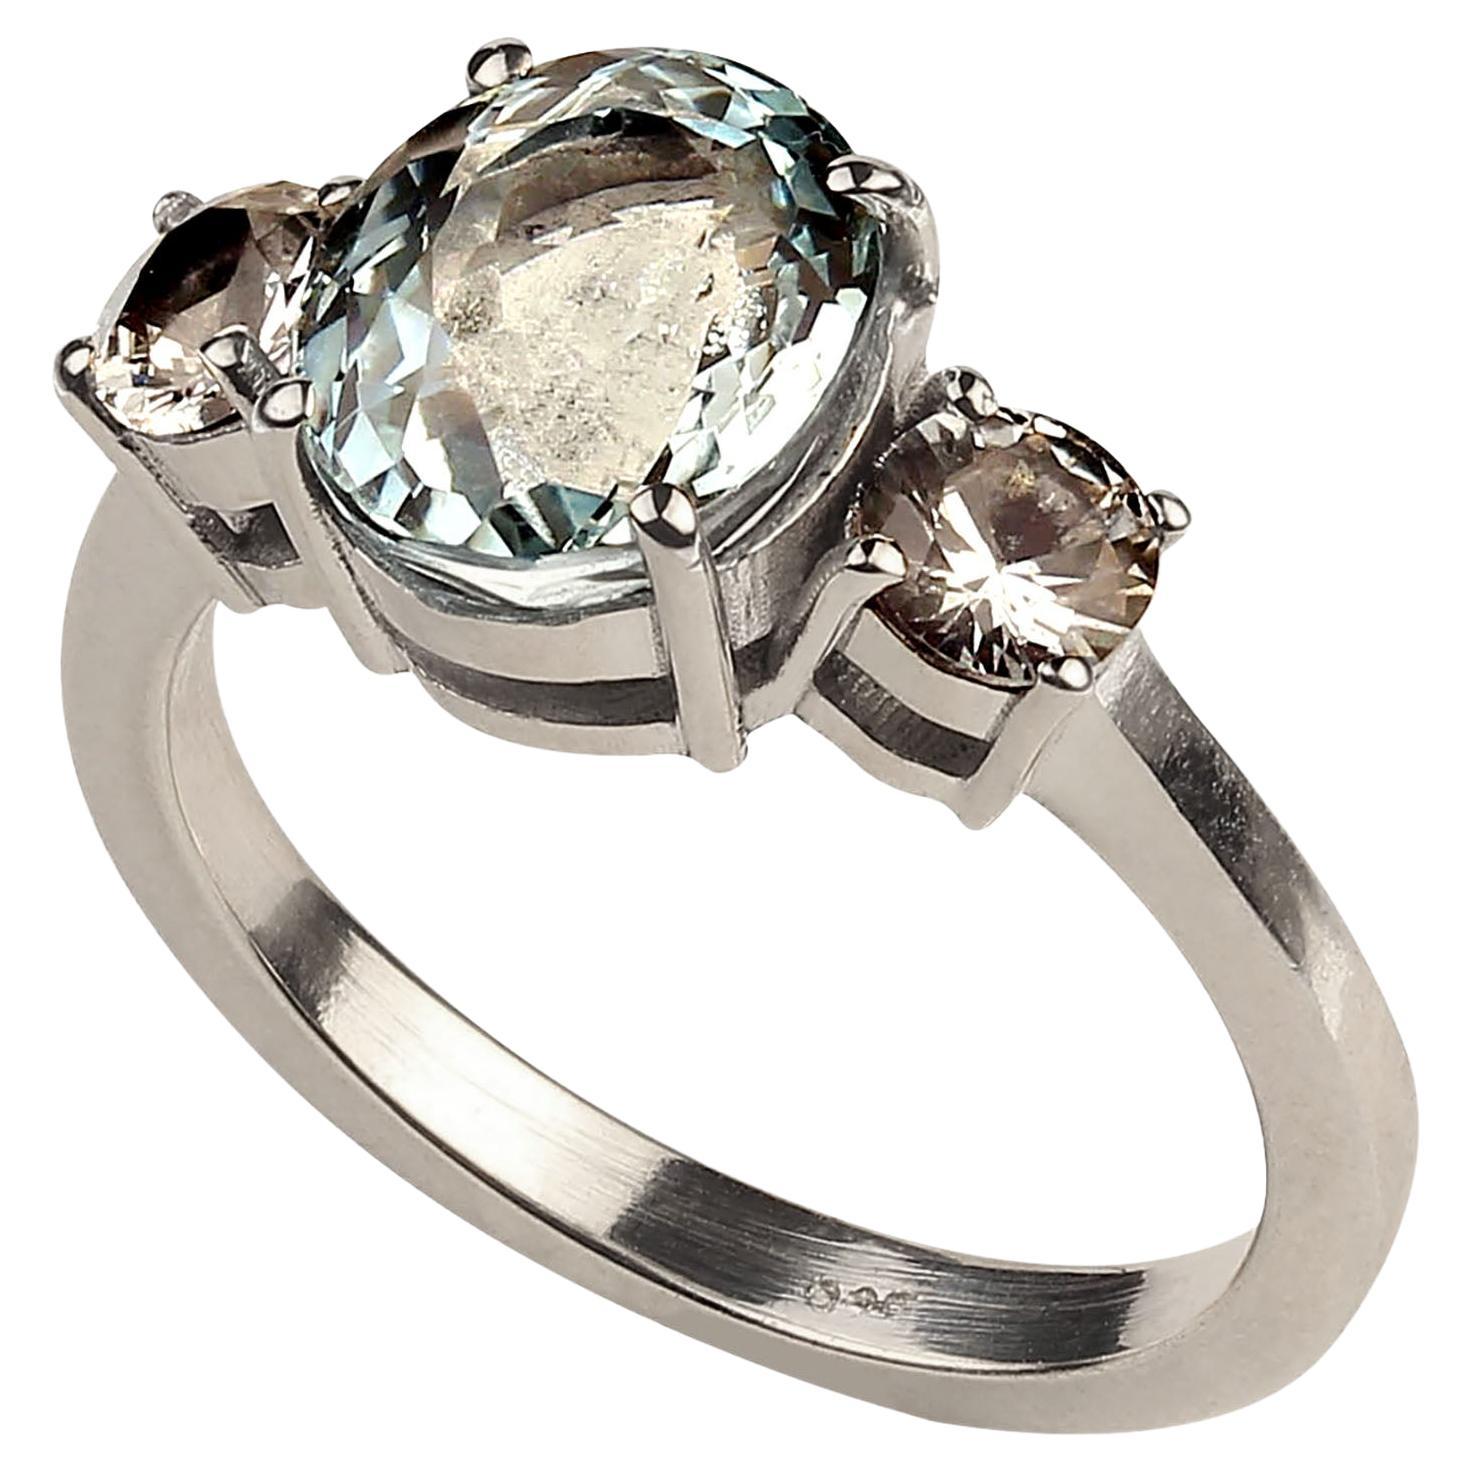 Oval Cut AJD 2.8ct Sparkling Oval Aquamarine and White Sapphire in Sterling Silver Ring